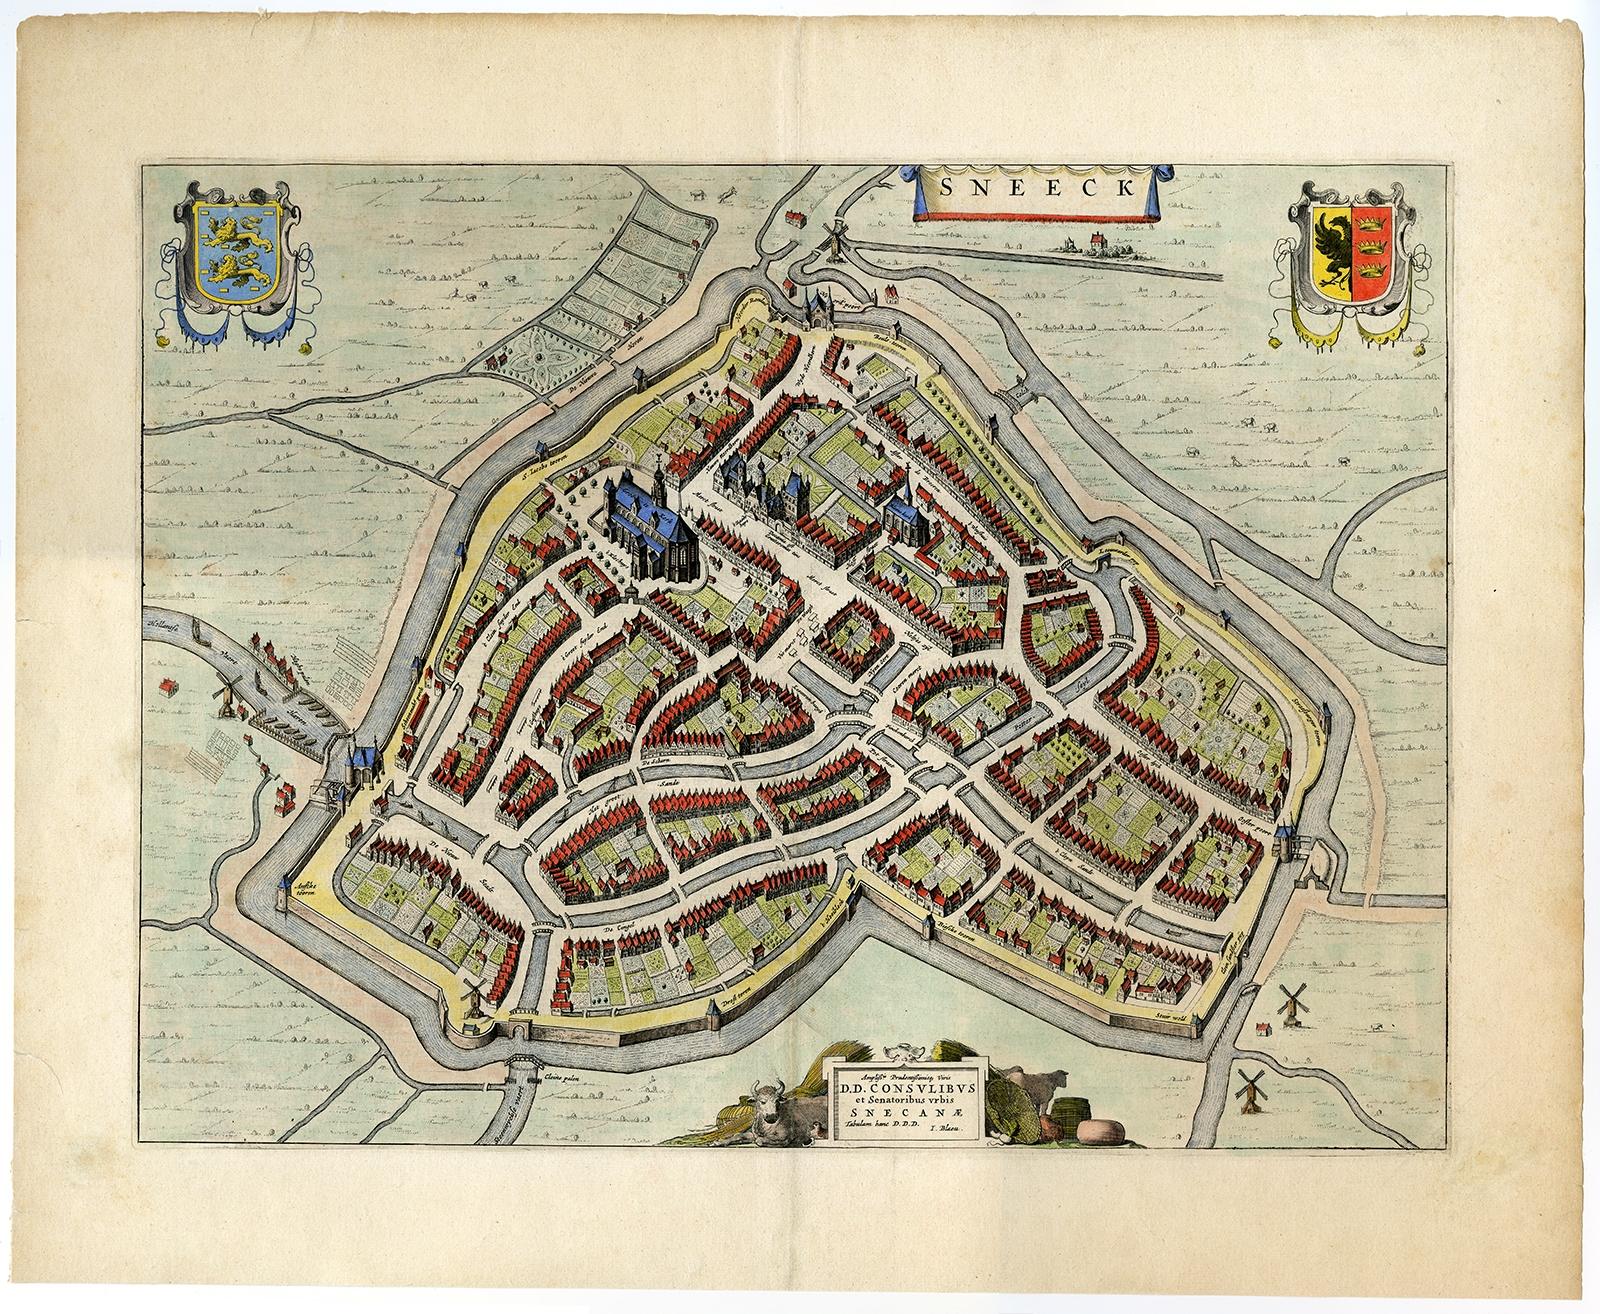 Antique map titled: 'Sneeck.' Bird's-eye view plan of Sneek, Friesland, The Netherlands. Text in Latin on verso. This plan originates from the famous city Atlas: 'Toneel der Steeden' published by Joan Blaeu 1649.

Artists and Engravers: Joan Blaeu